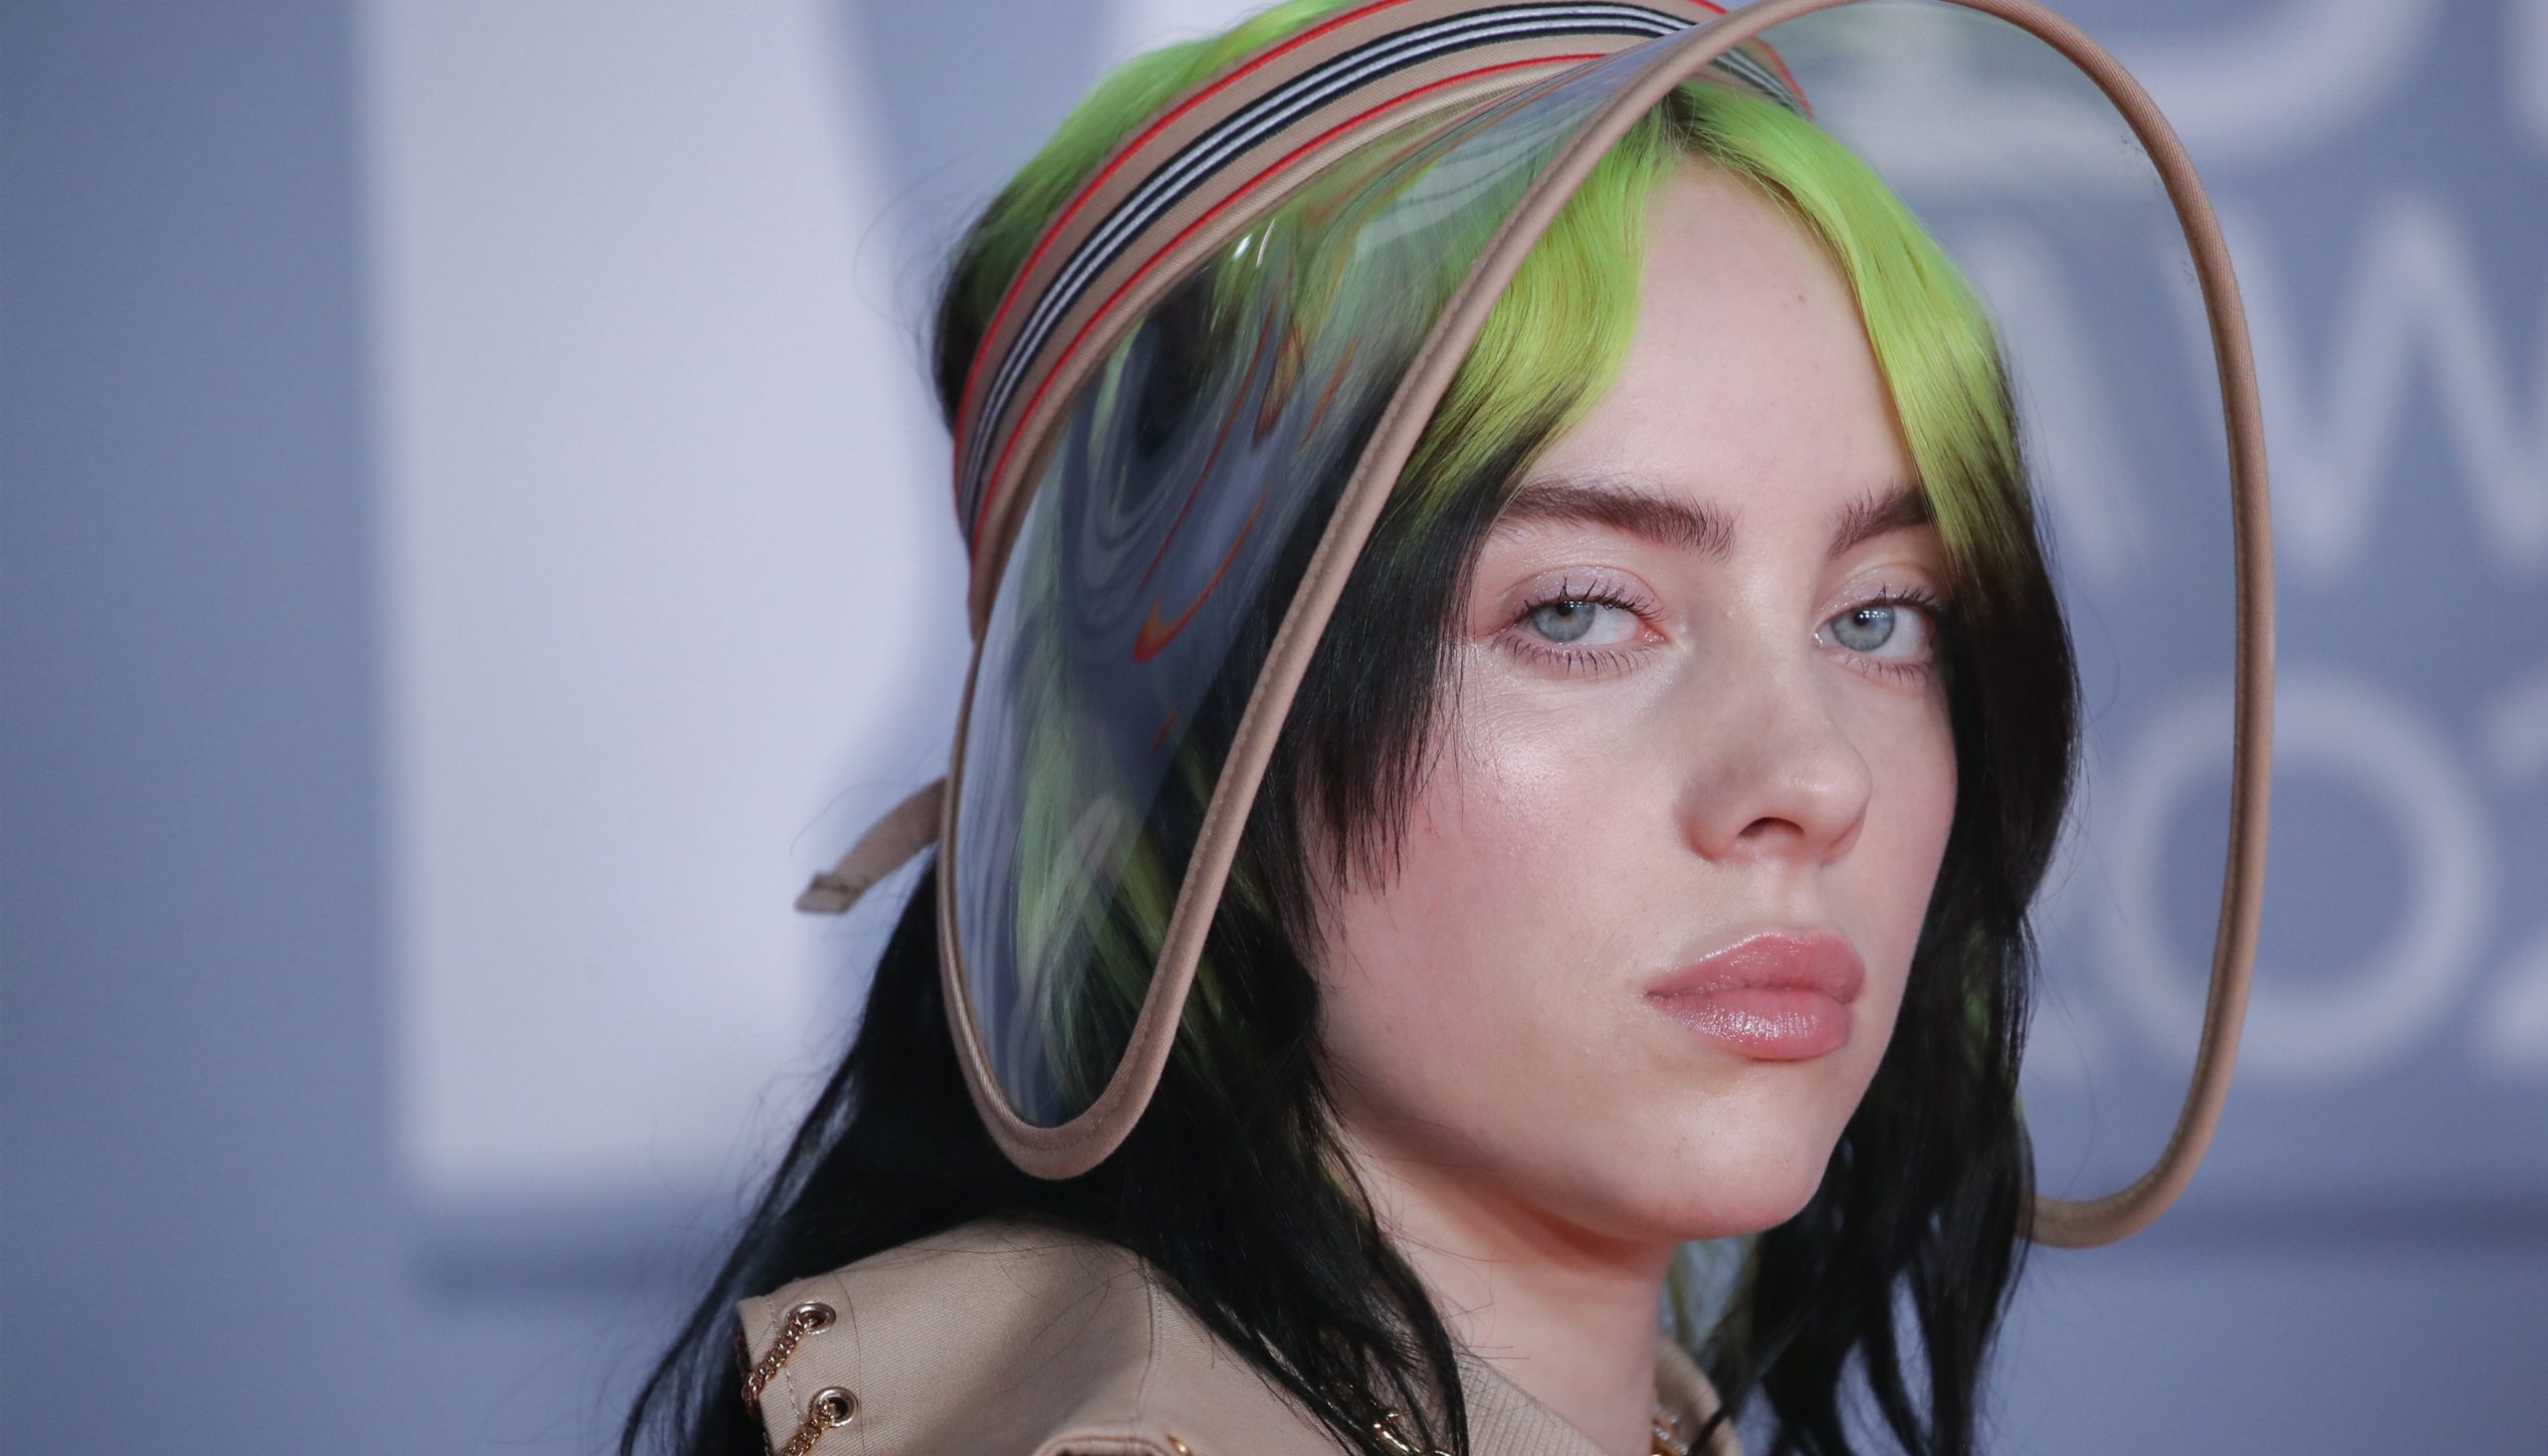 Billie Eilish's Mirror Chrome Nails Are the Star of Her Vanity Fair Cover Shoot